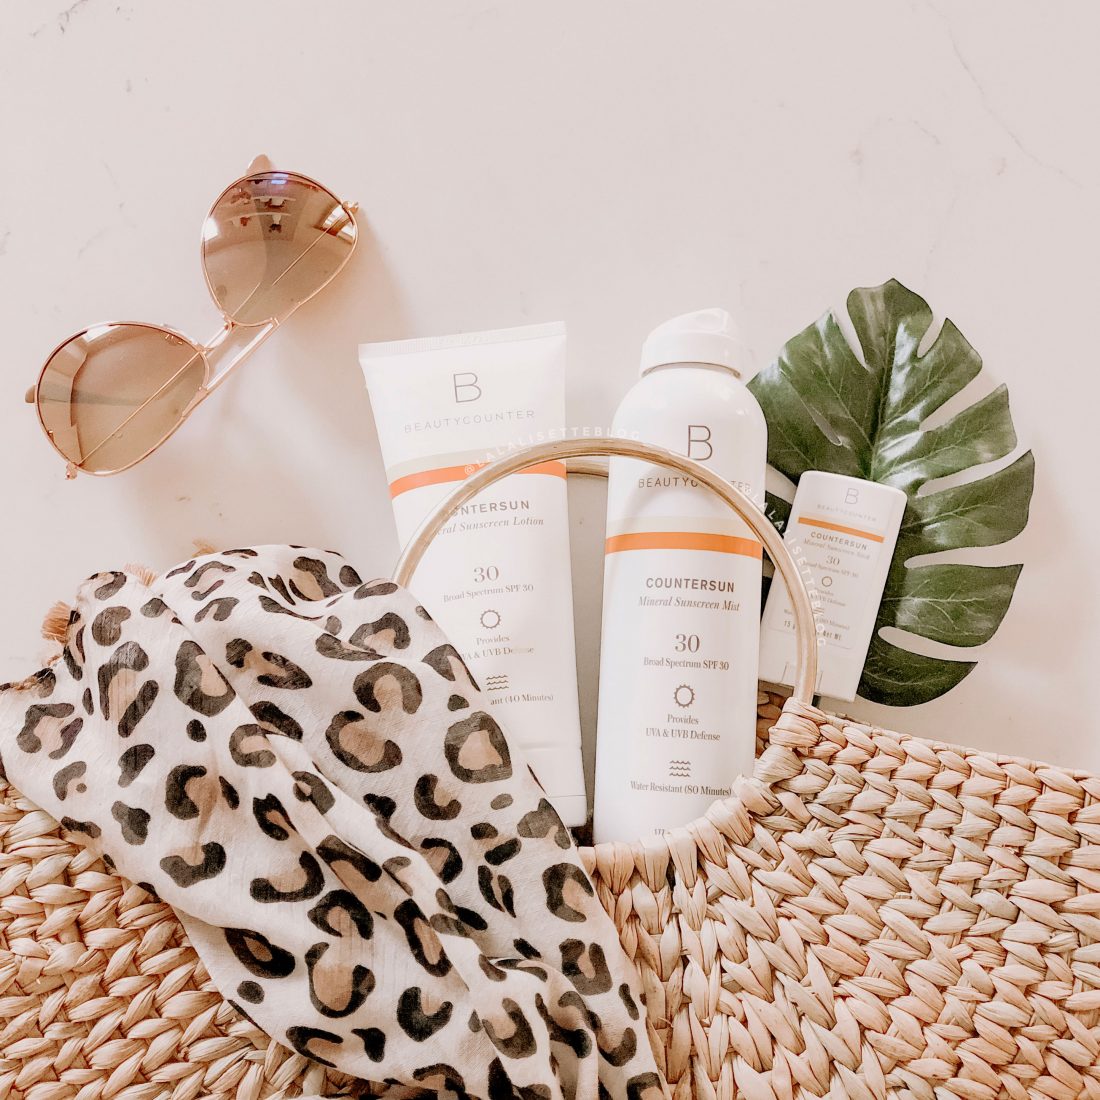 Beautycounter Countersun mineral sunscreens with straw bag and sunglasses - Why We Switched to Mineral Sunscreen